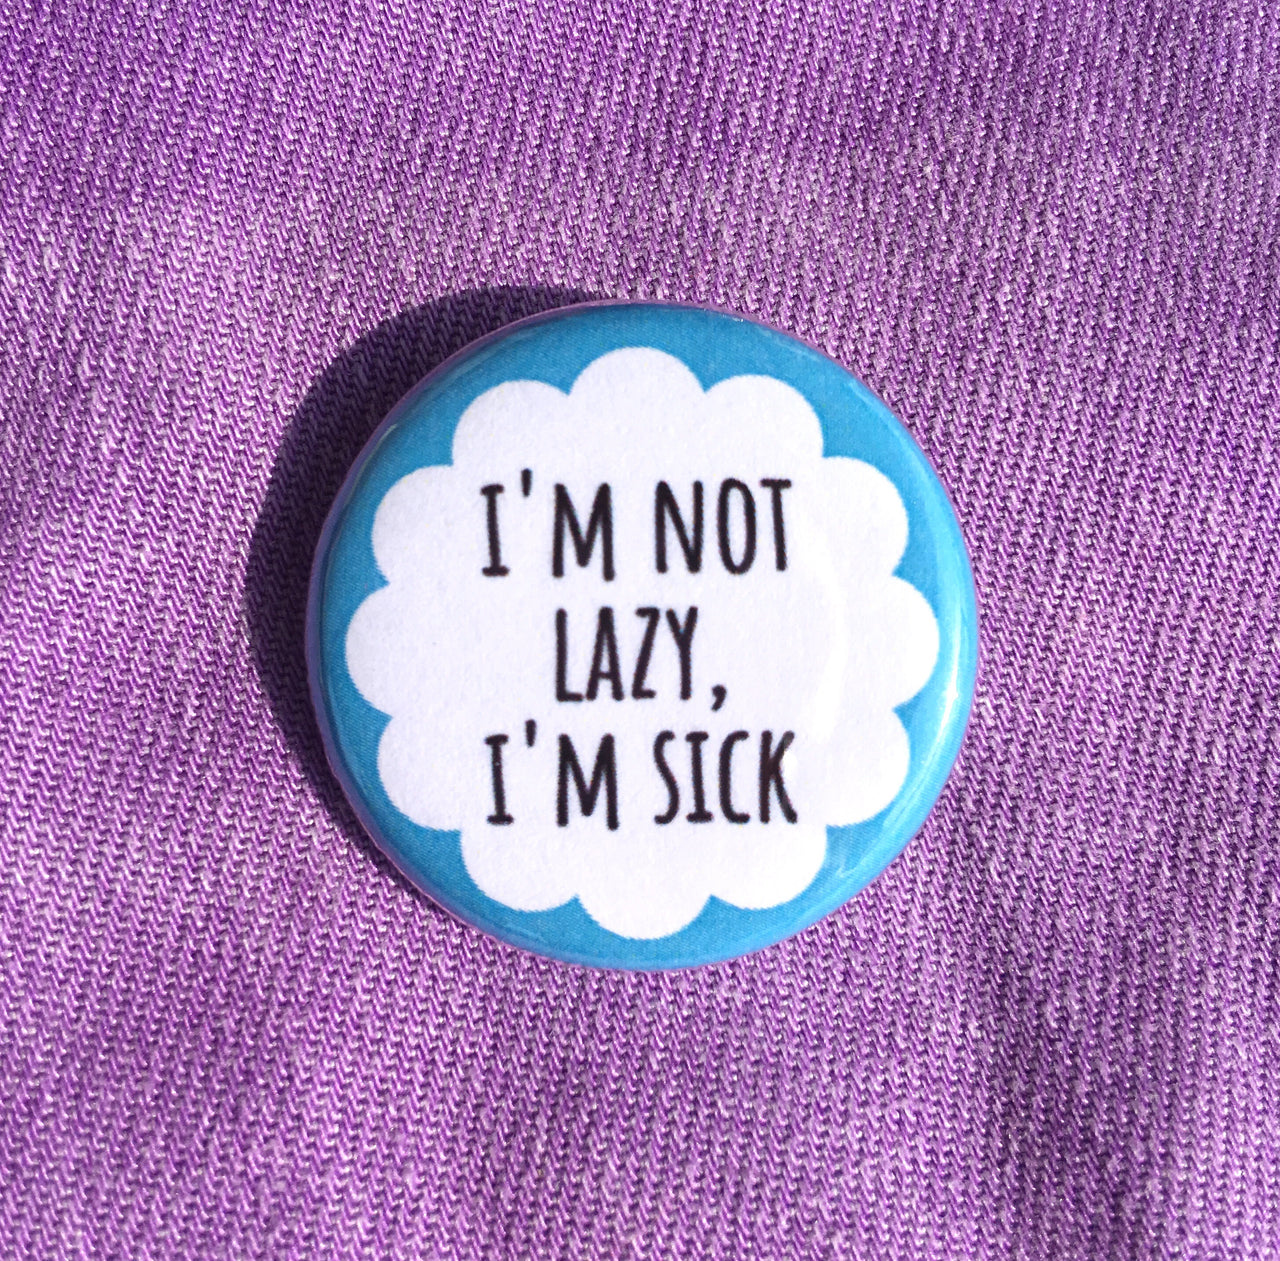 I’m not lazy, I’m sick - Radical Buttons